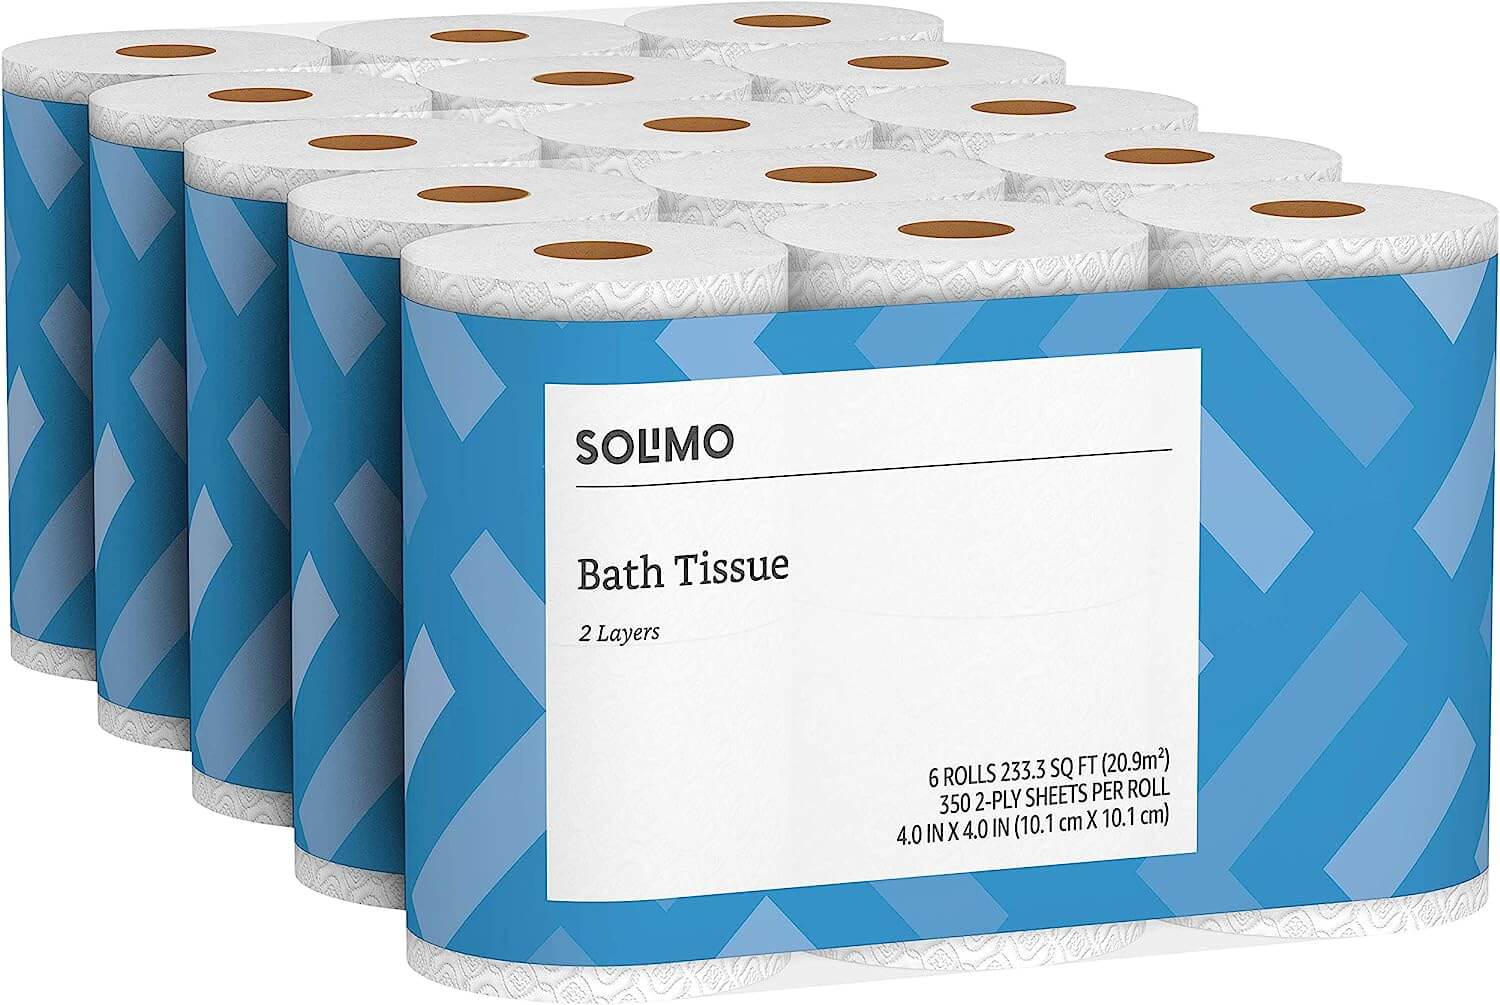 Solimo 2-Ply Toilet Paper